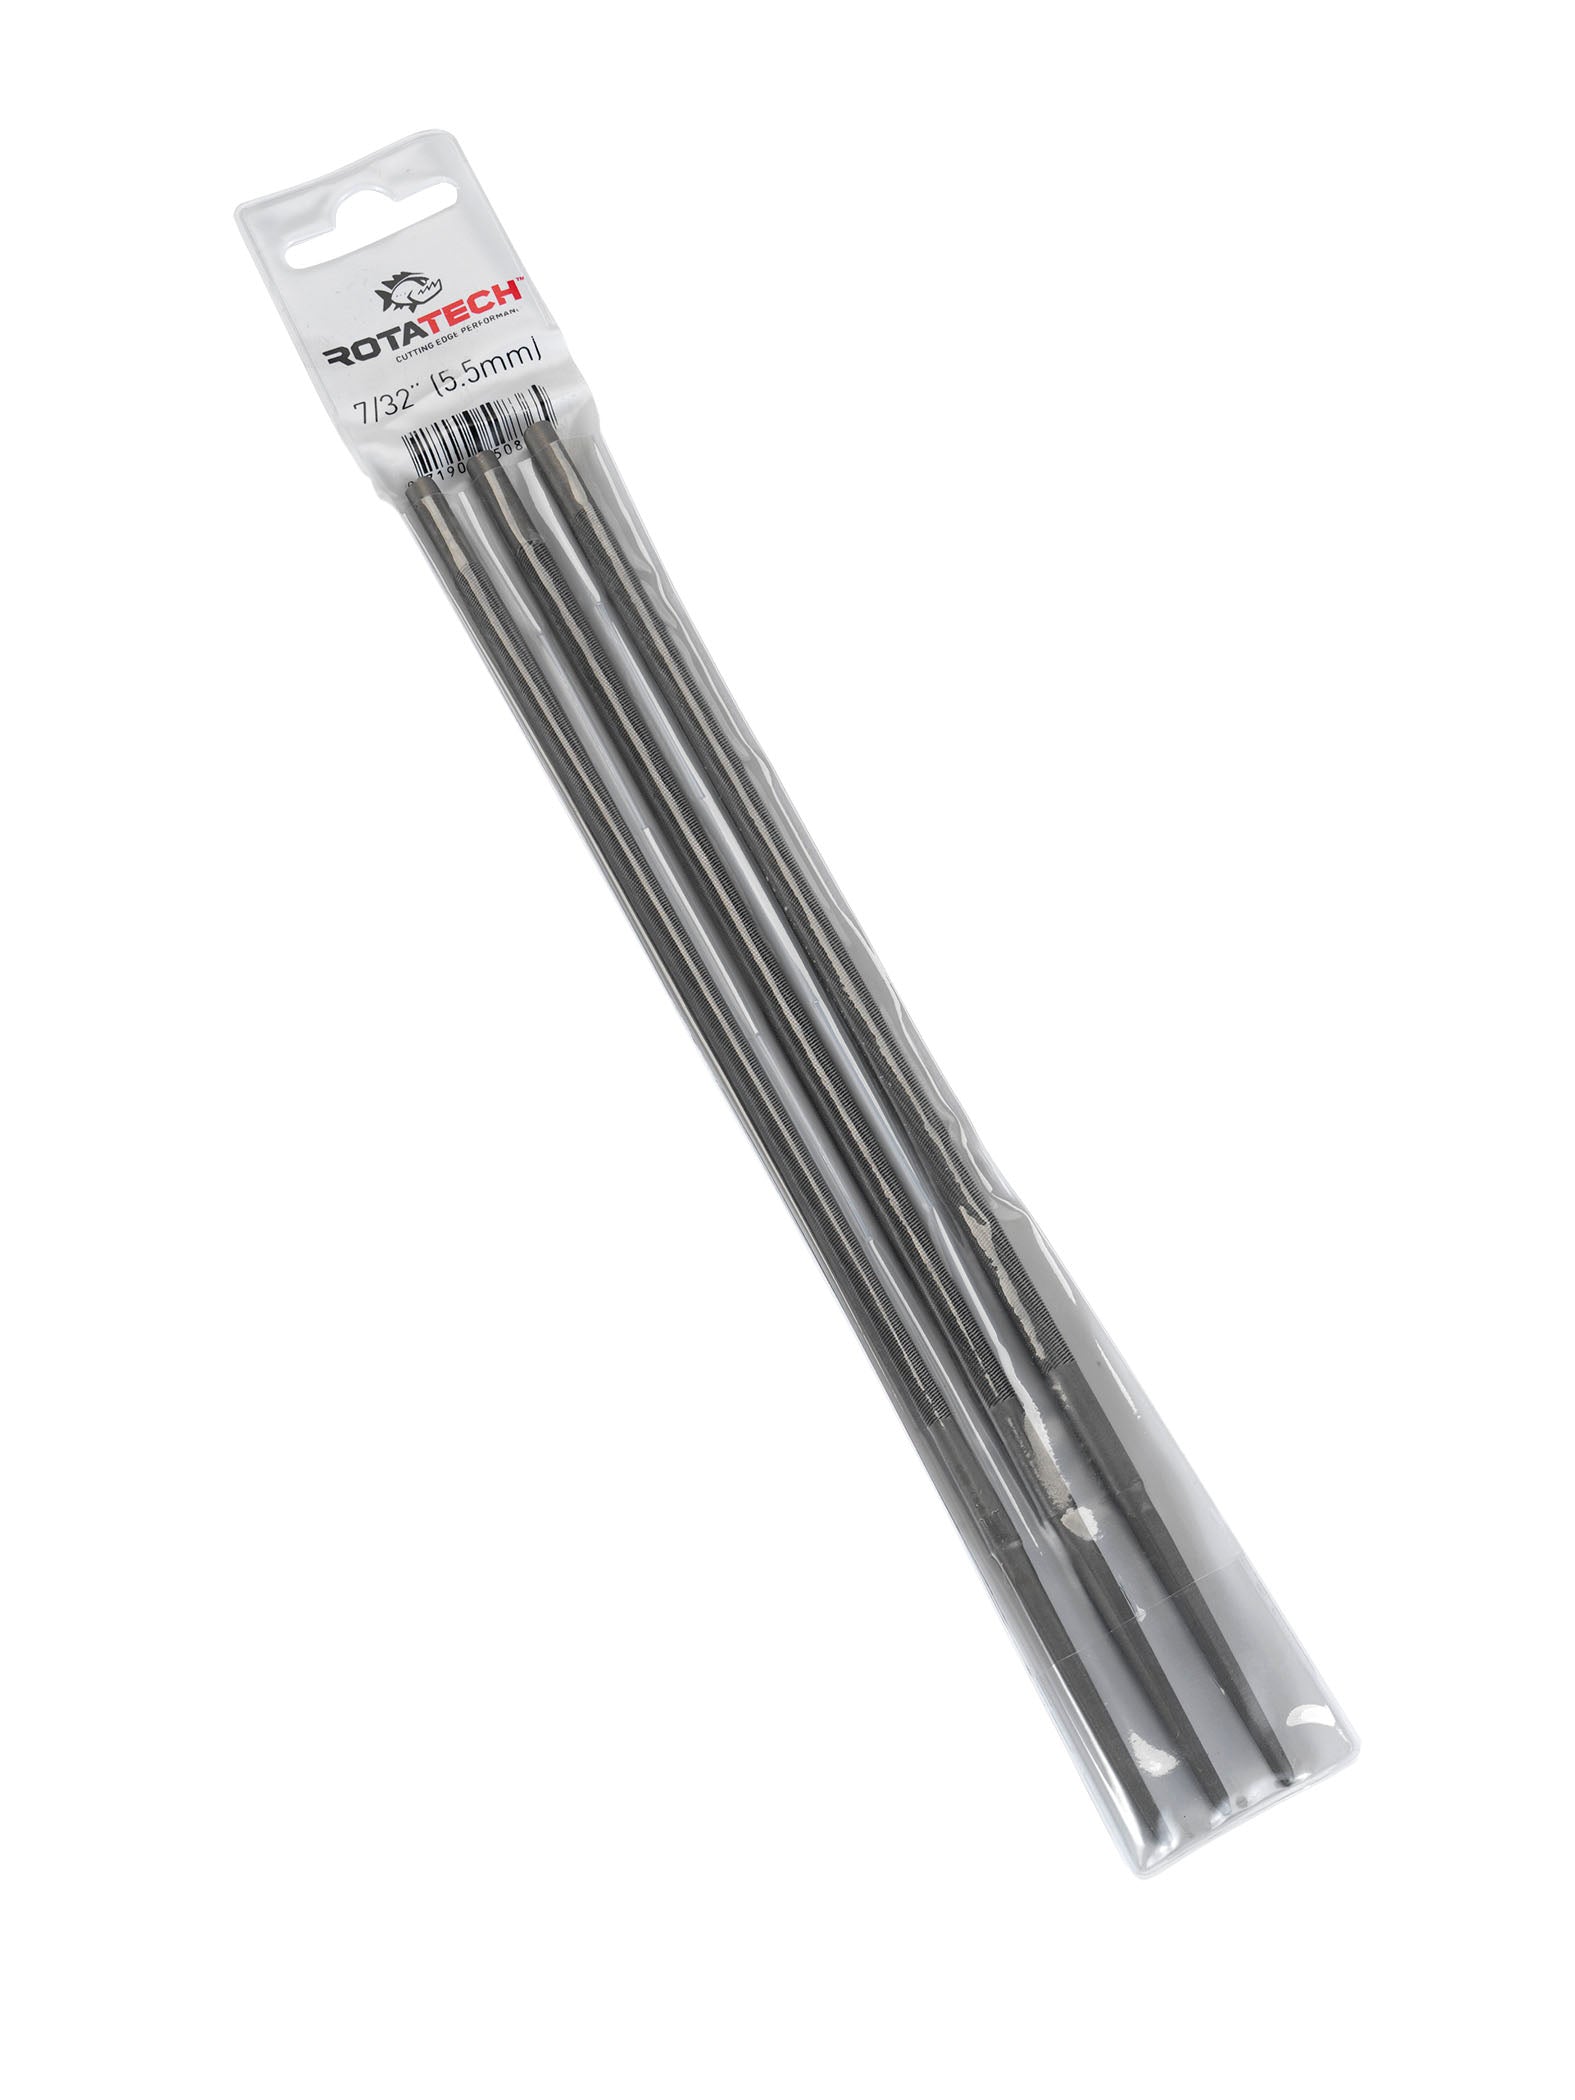 Rotatech 7/32" Round Chainsaw Files Pack Of 3